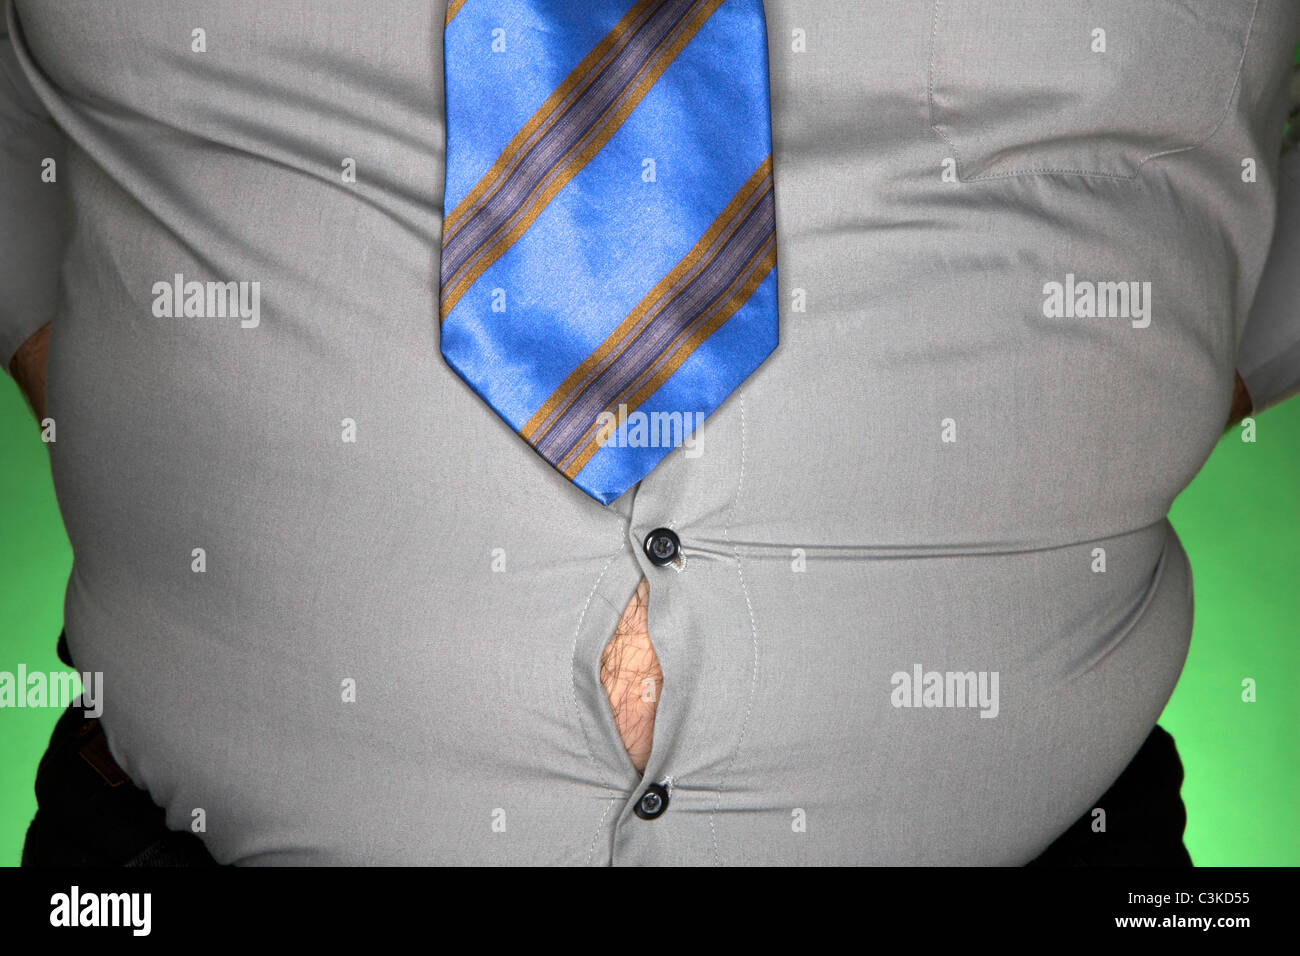 Obese man with shirt gaping open, close-up Stock Photo